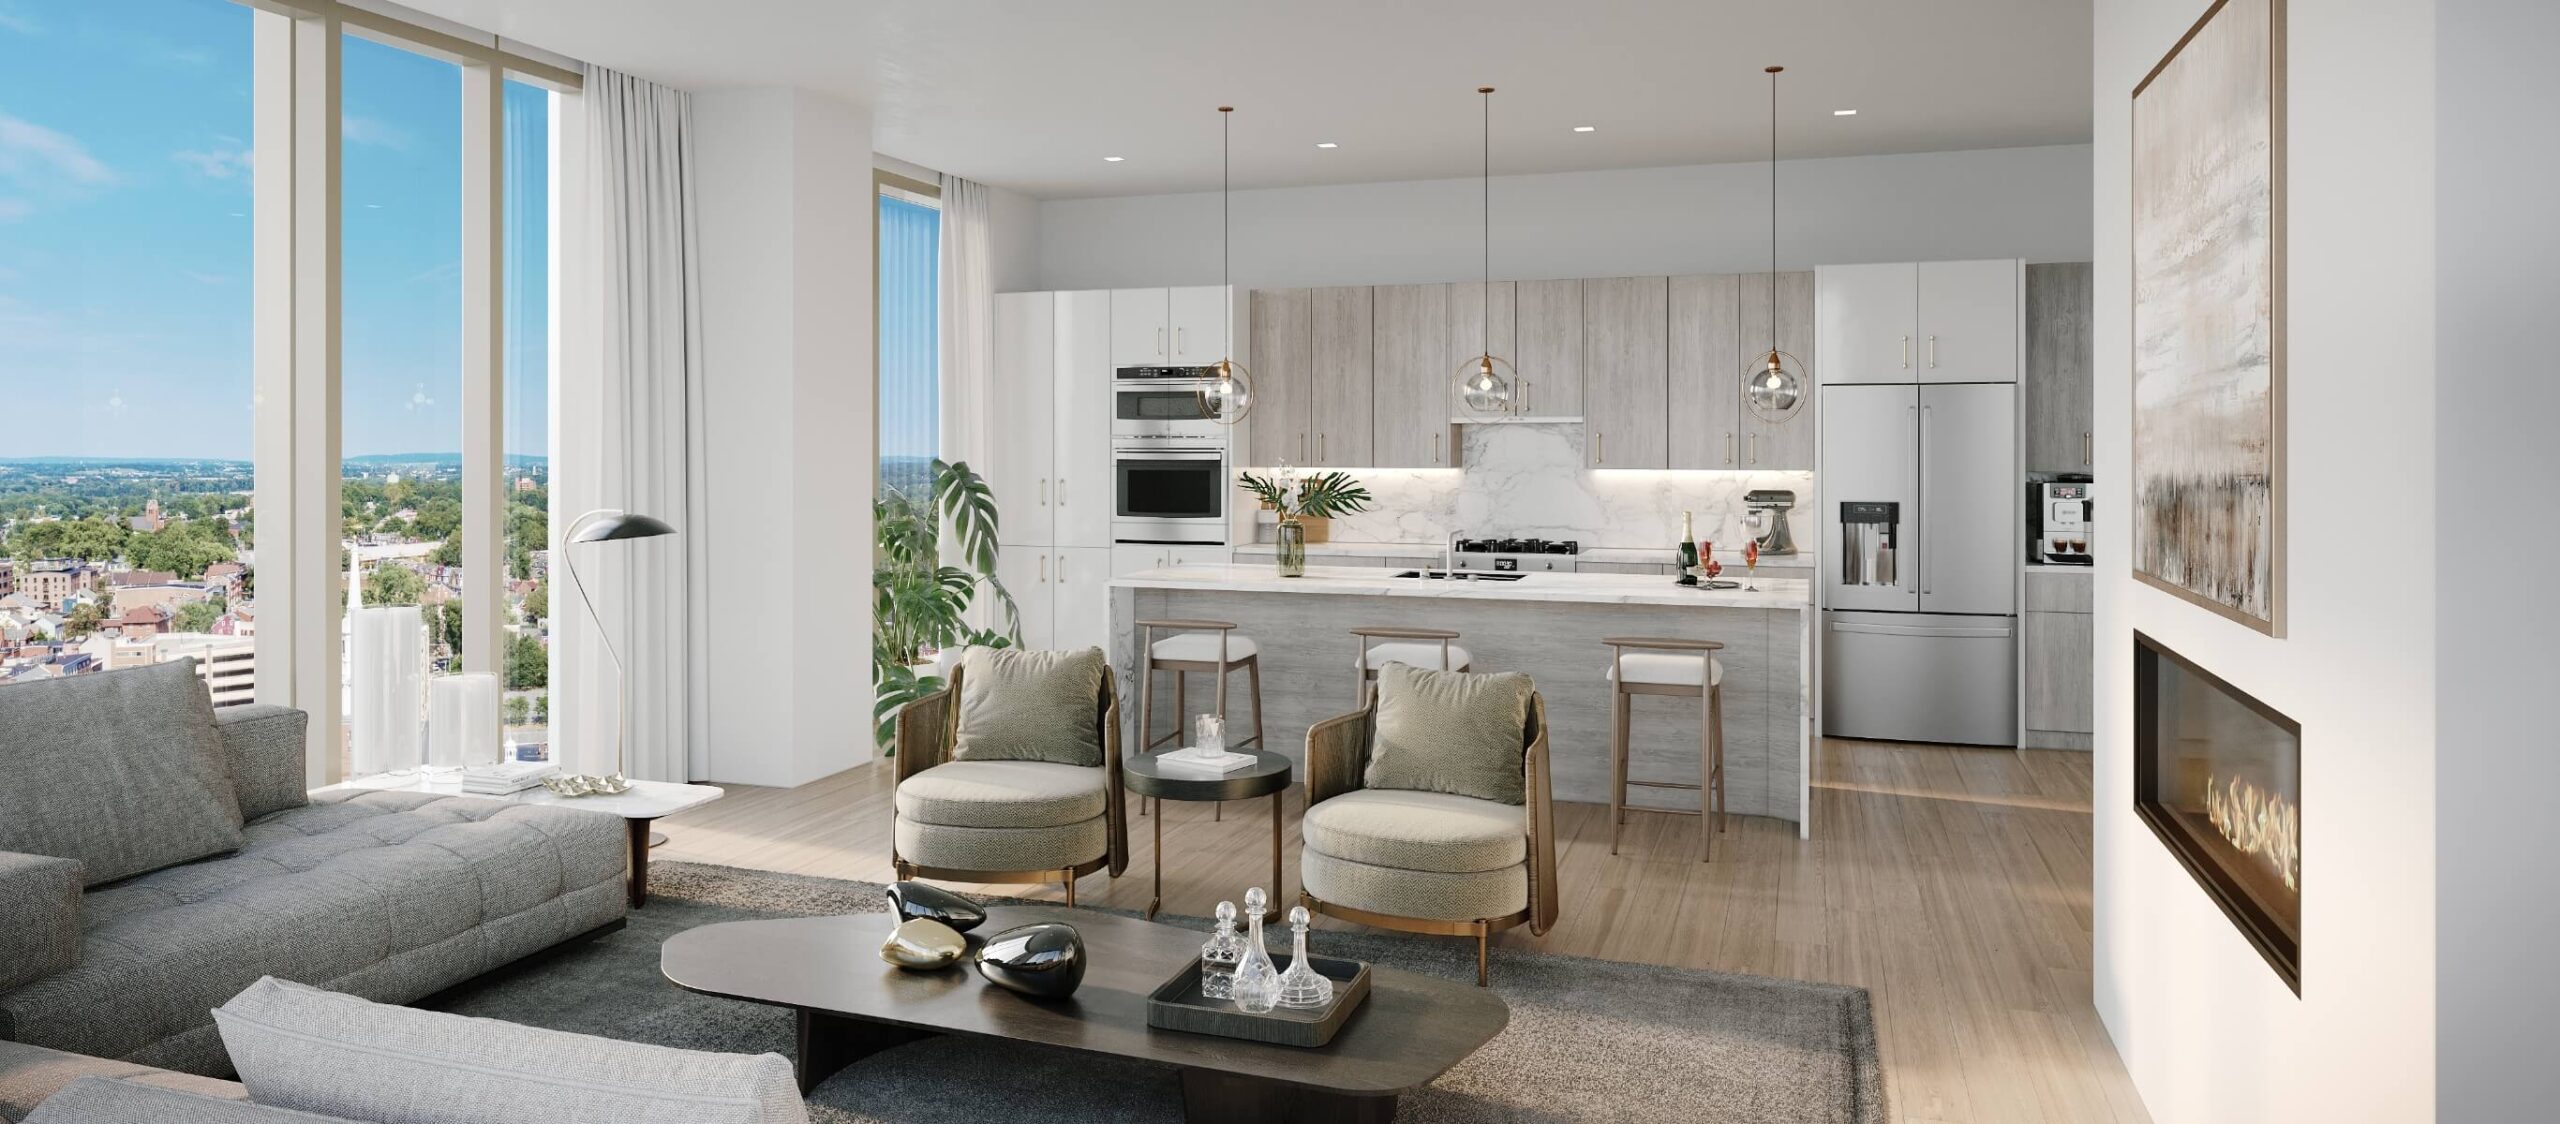 A rendering of a living room in a 55+ retirement community with a view of the city.